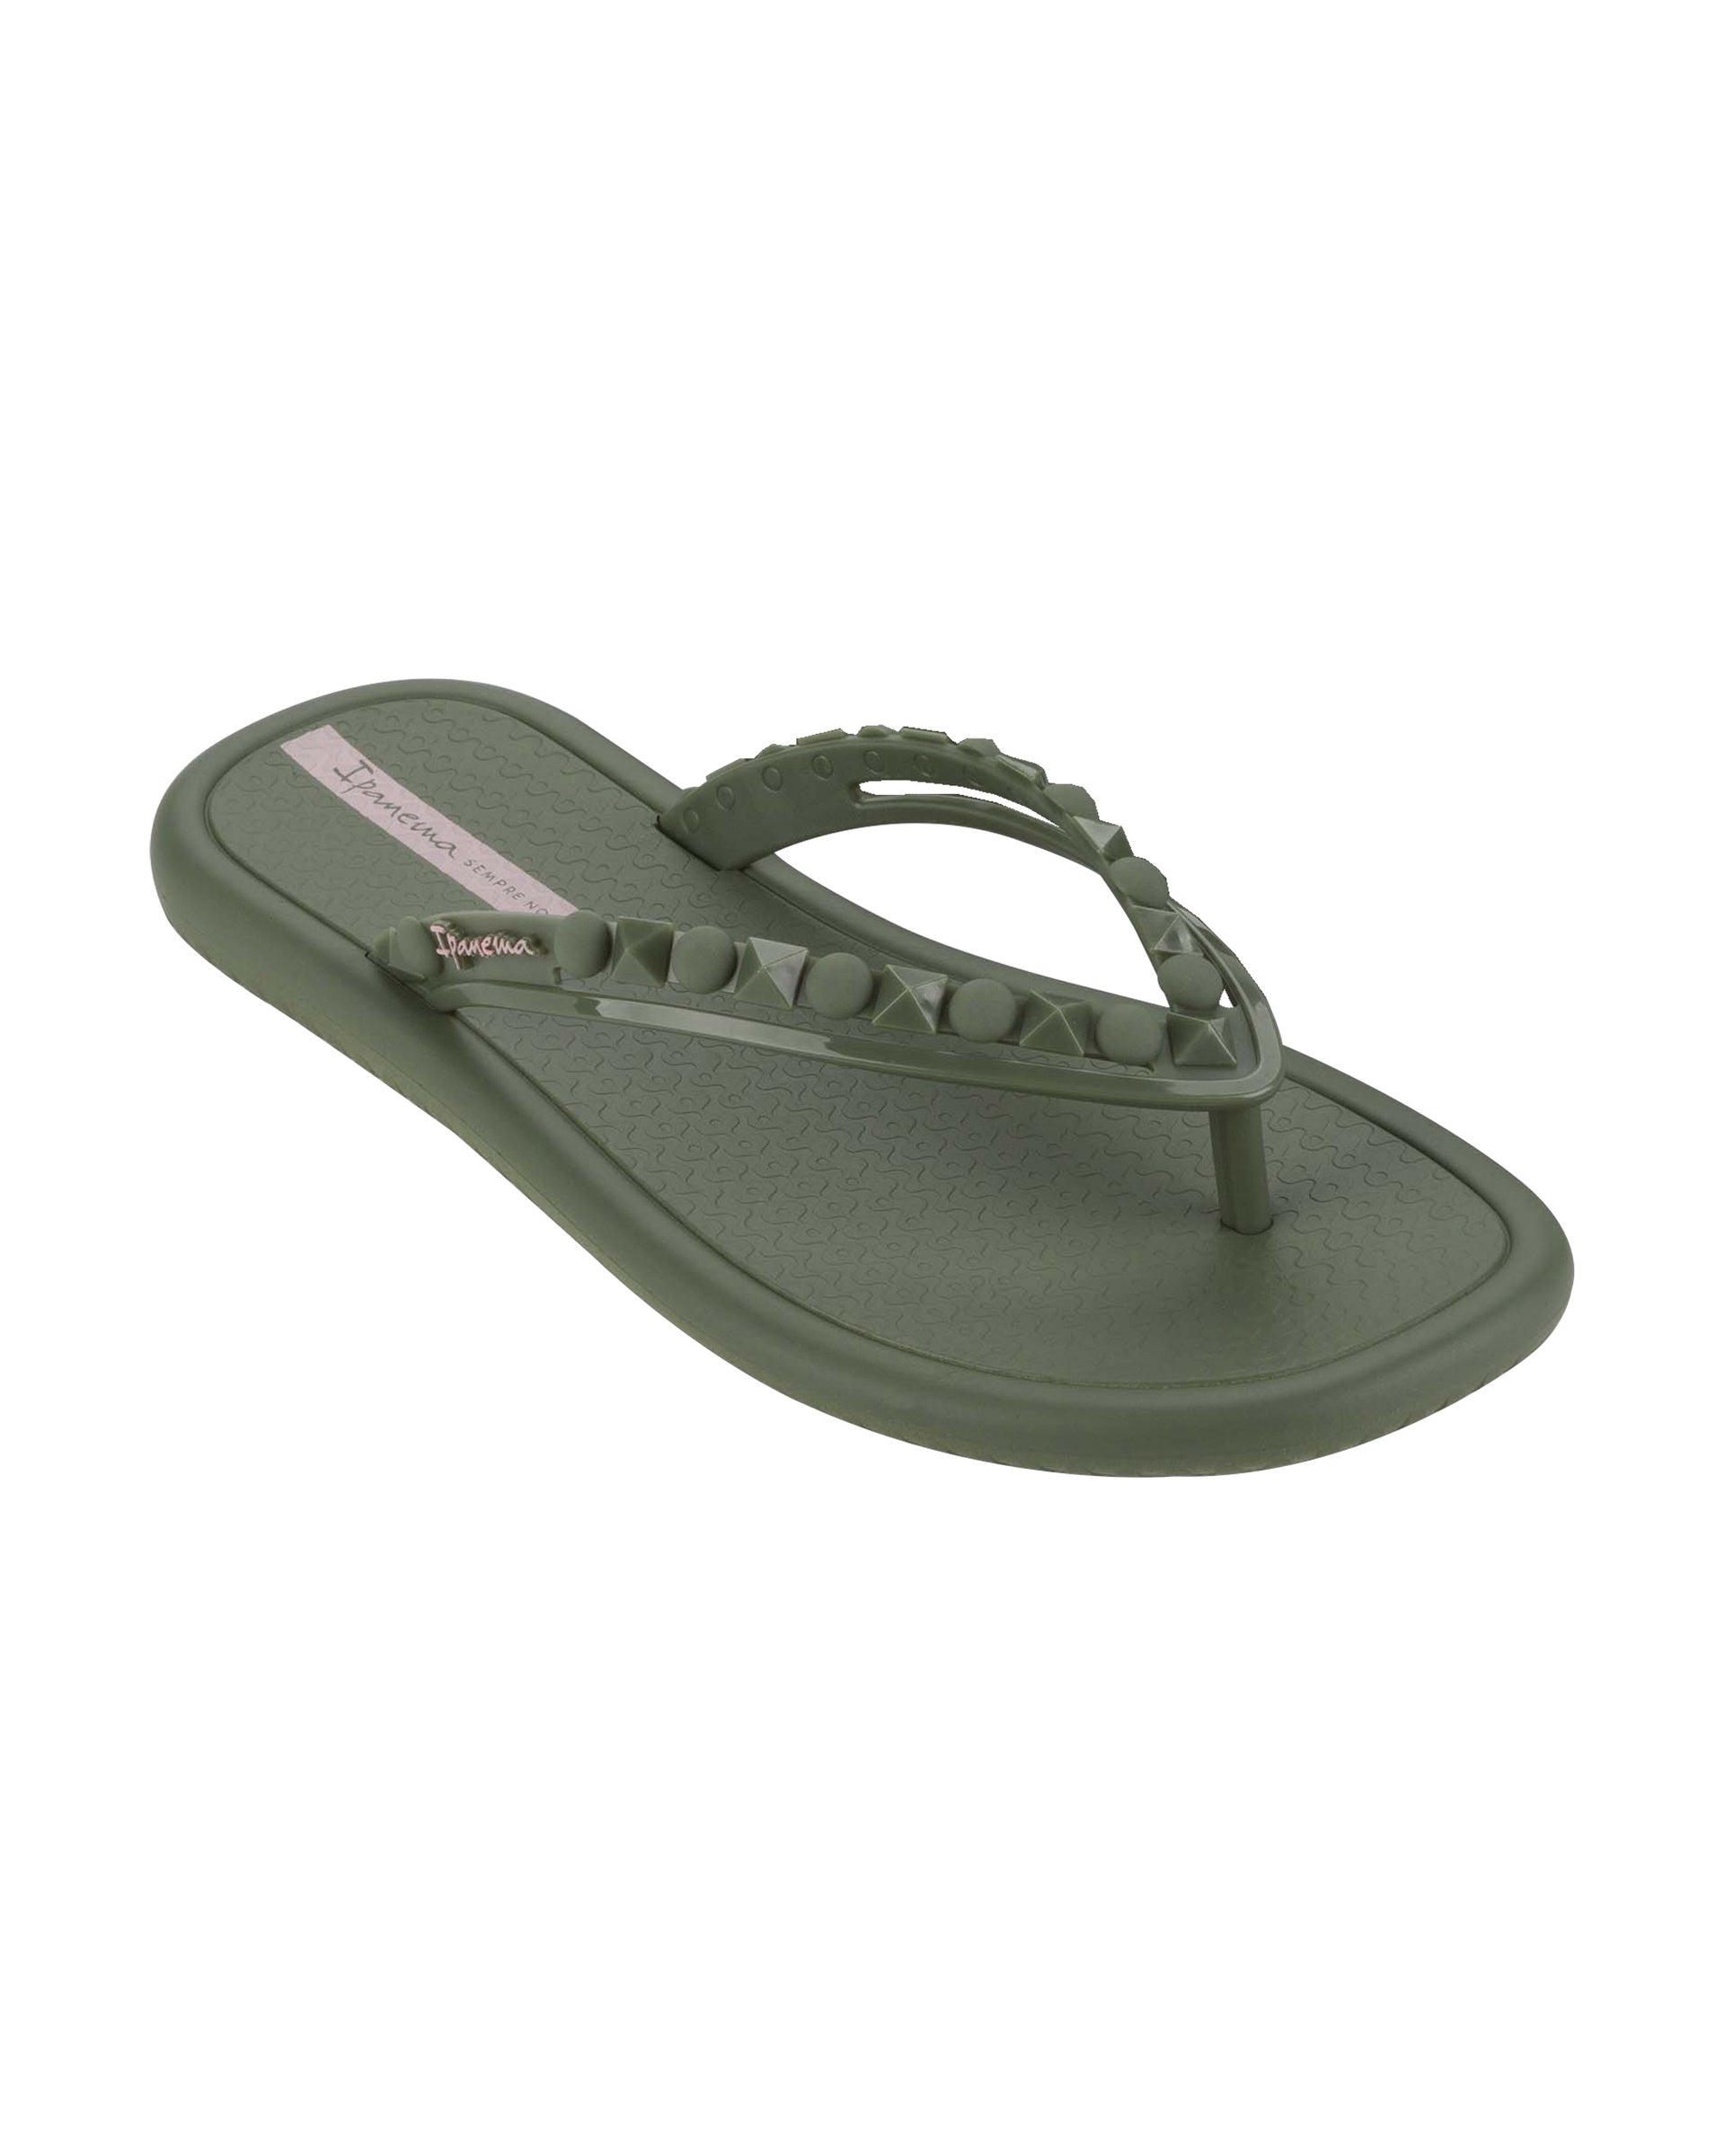 Angled view of a green Ipanema Meu Sol women's flip flop with stud details on strap.